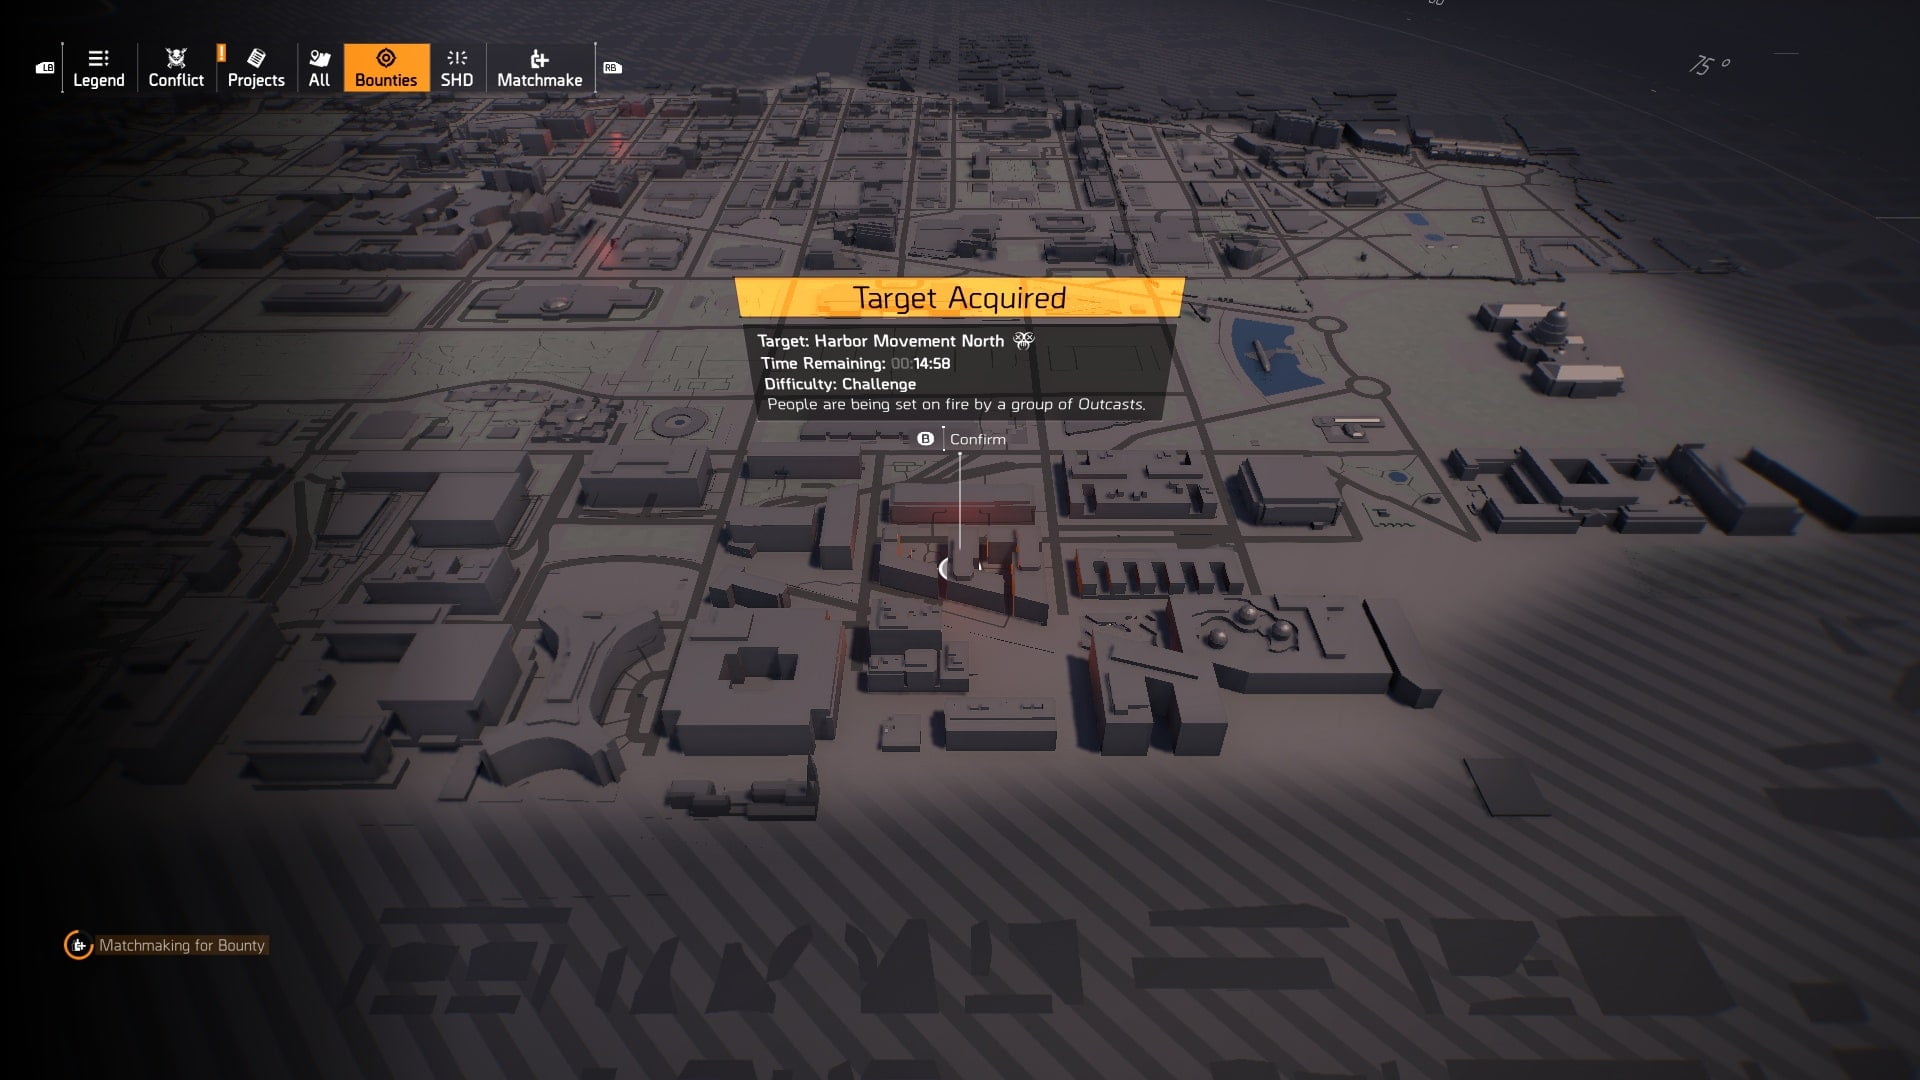 TheDivision2 5 12 2019 4 00 35 PM 435